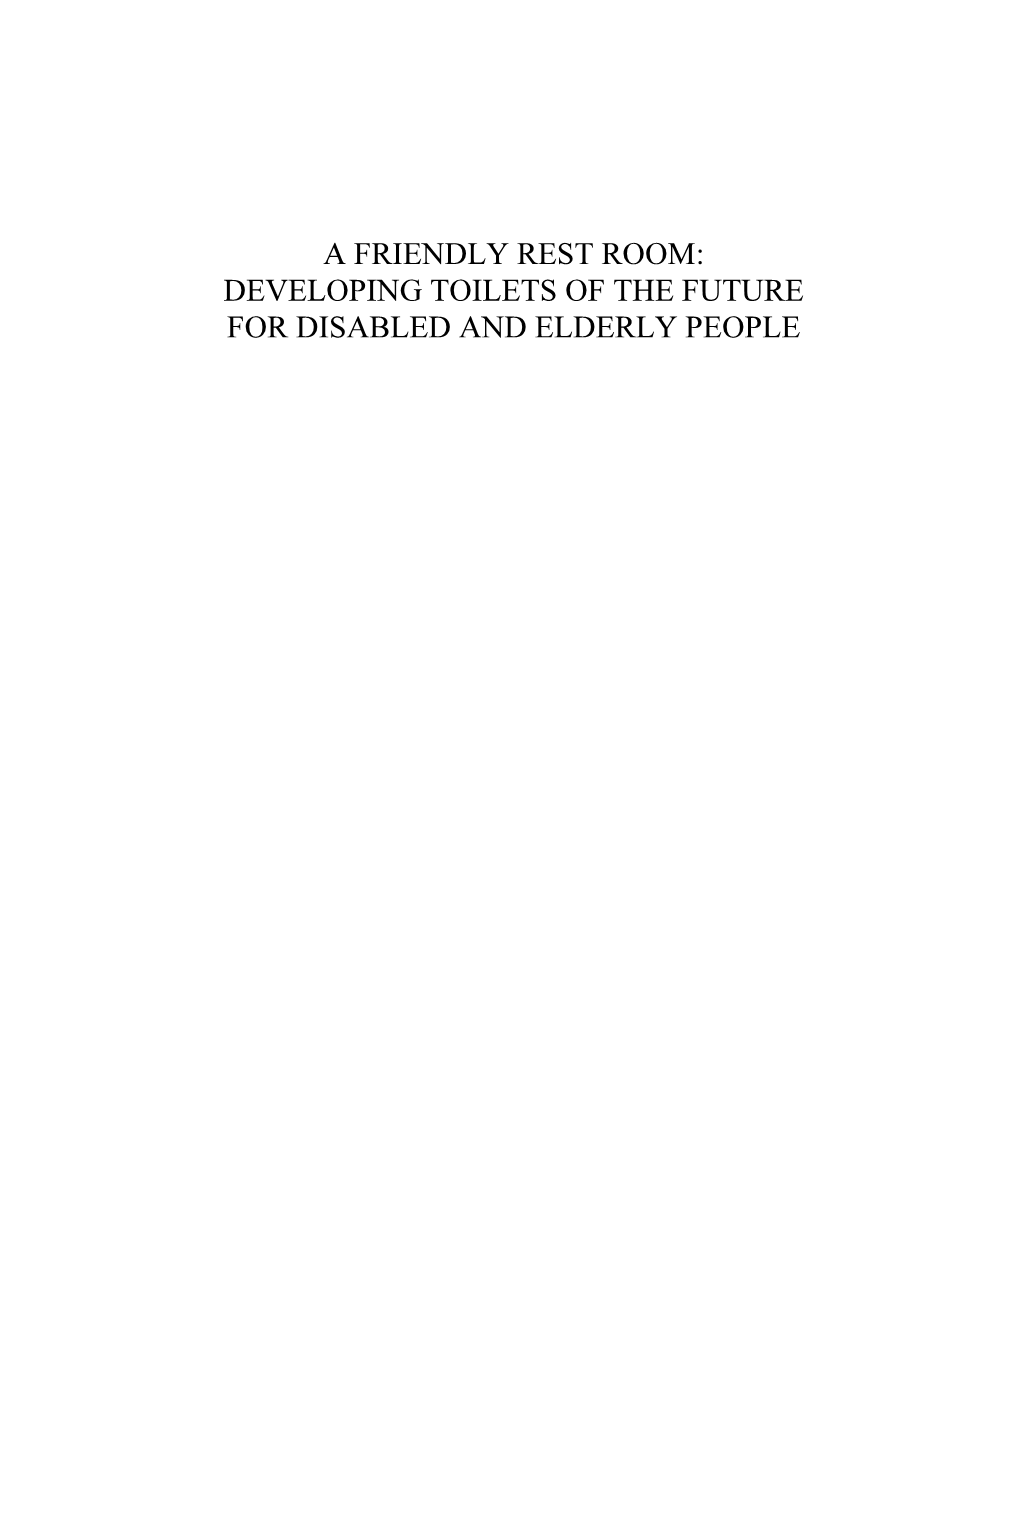 DEVELOPING TOILETS of the FUTURE for DISABLED and ELDERLY PEOPLE Assistive Technology Research Series